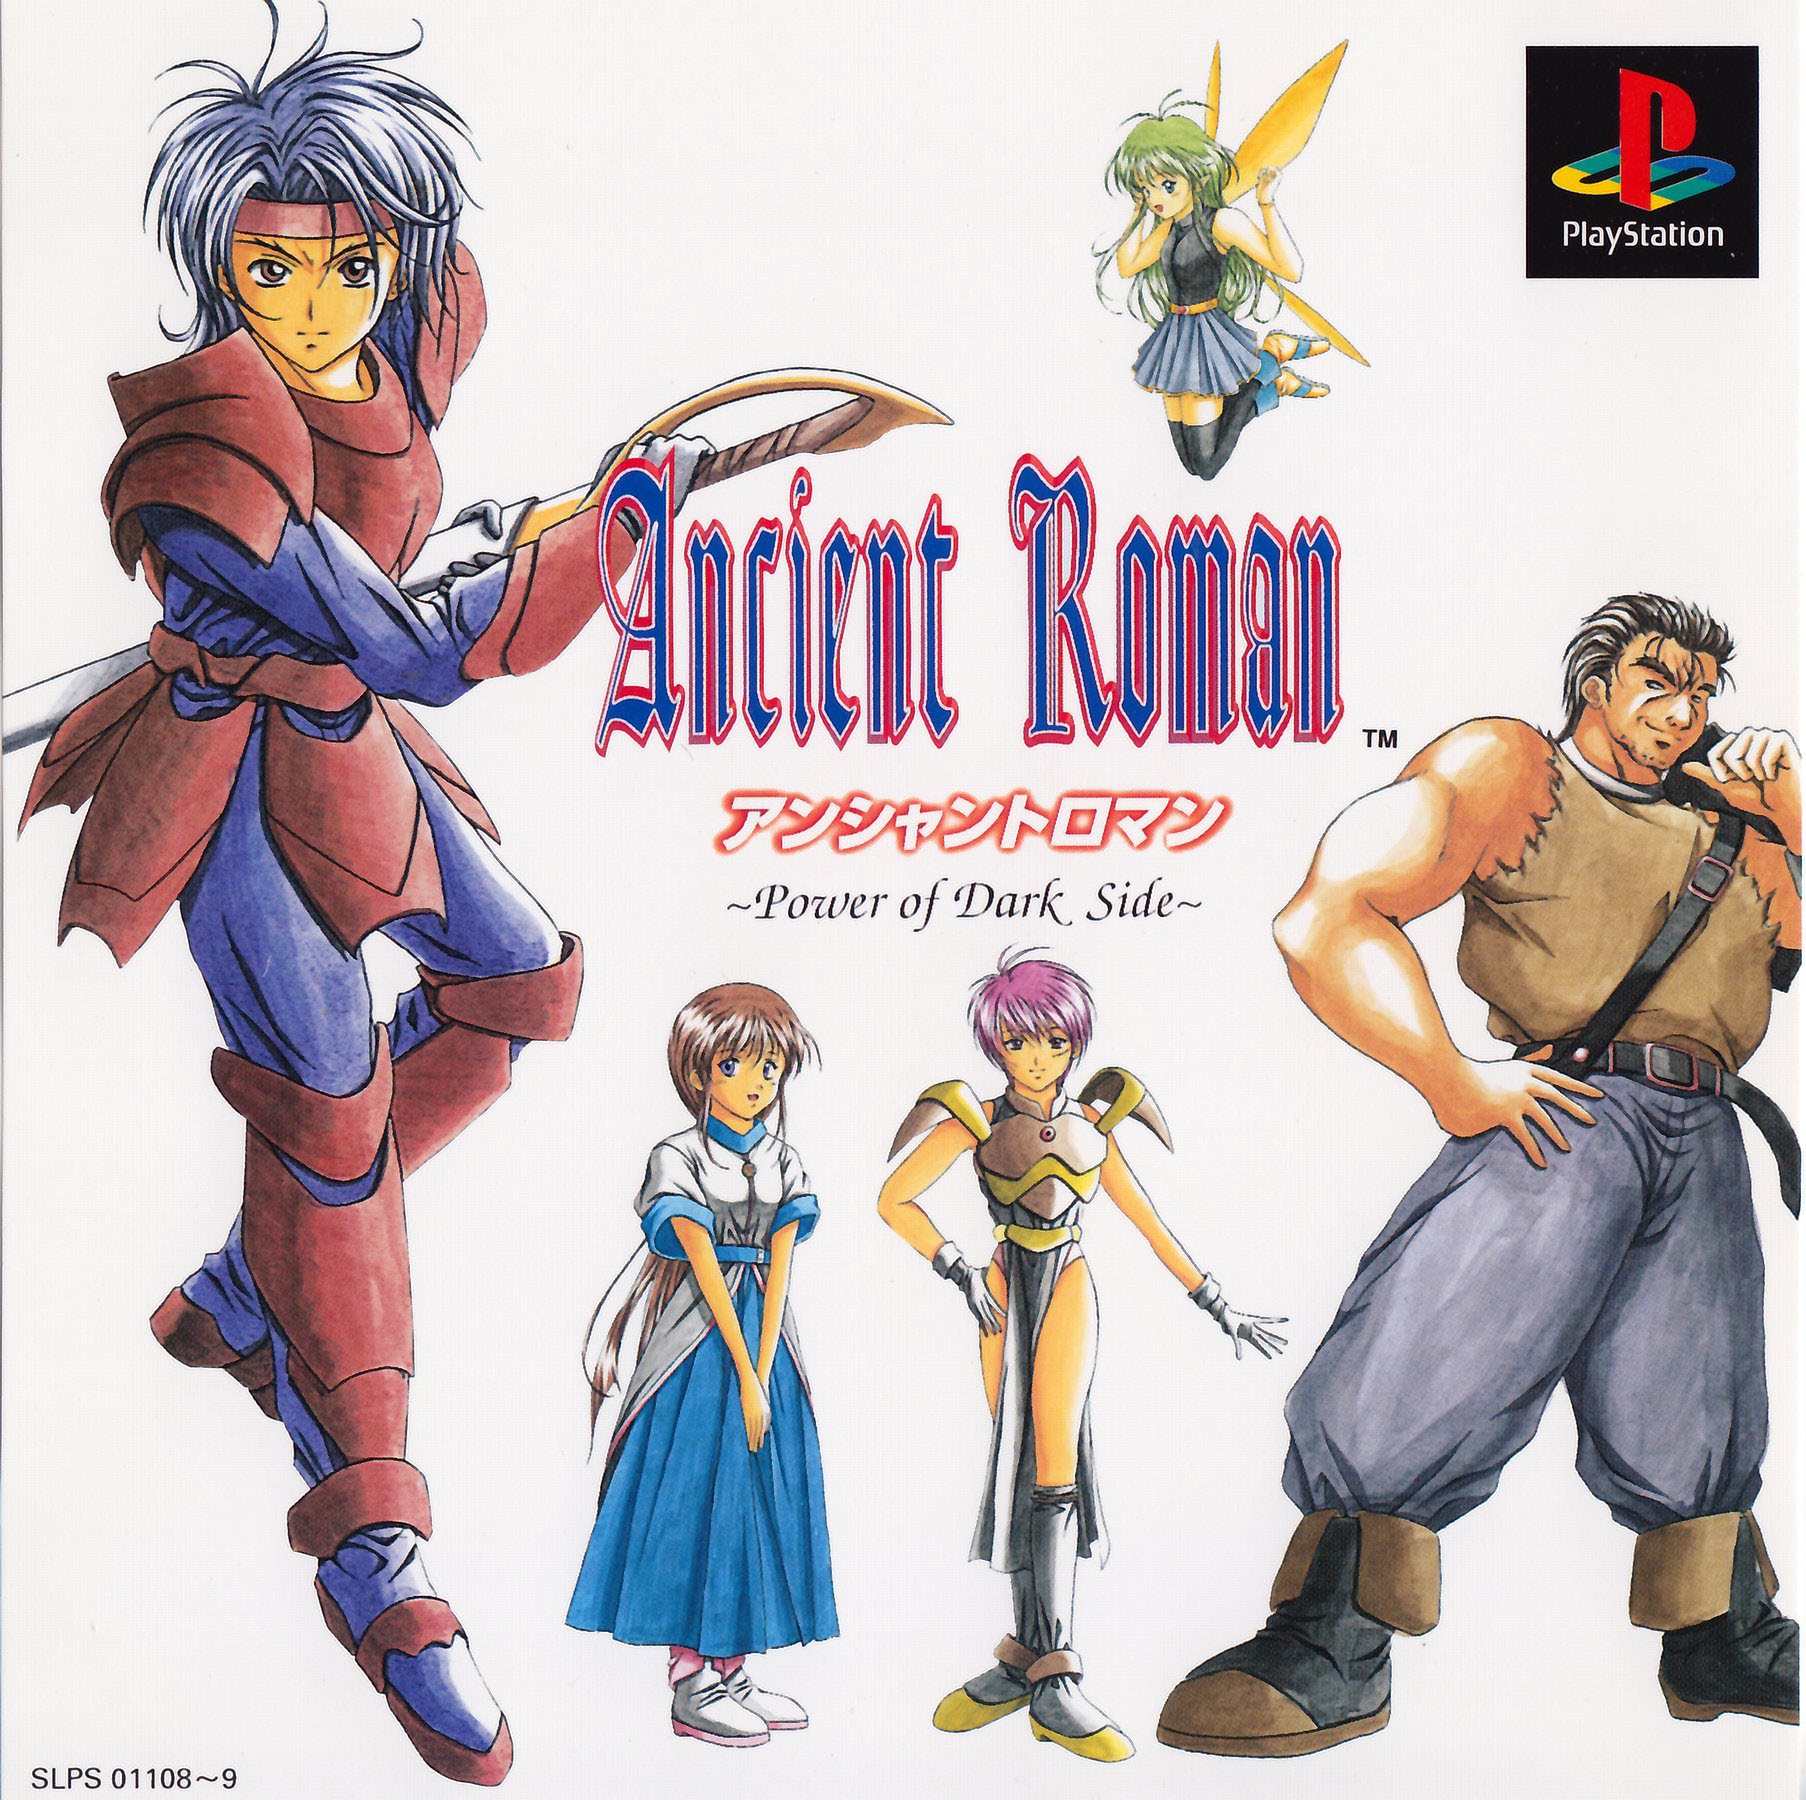 Is there an English translation/ rom for the PS1 game? I'd love to